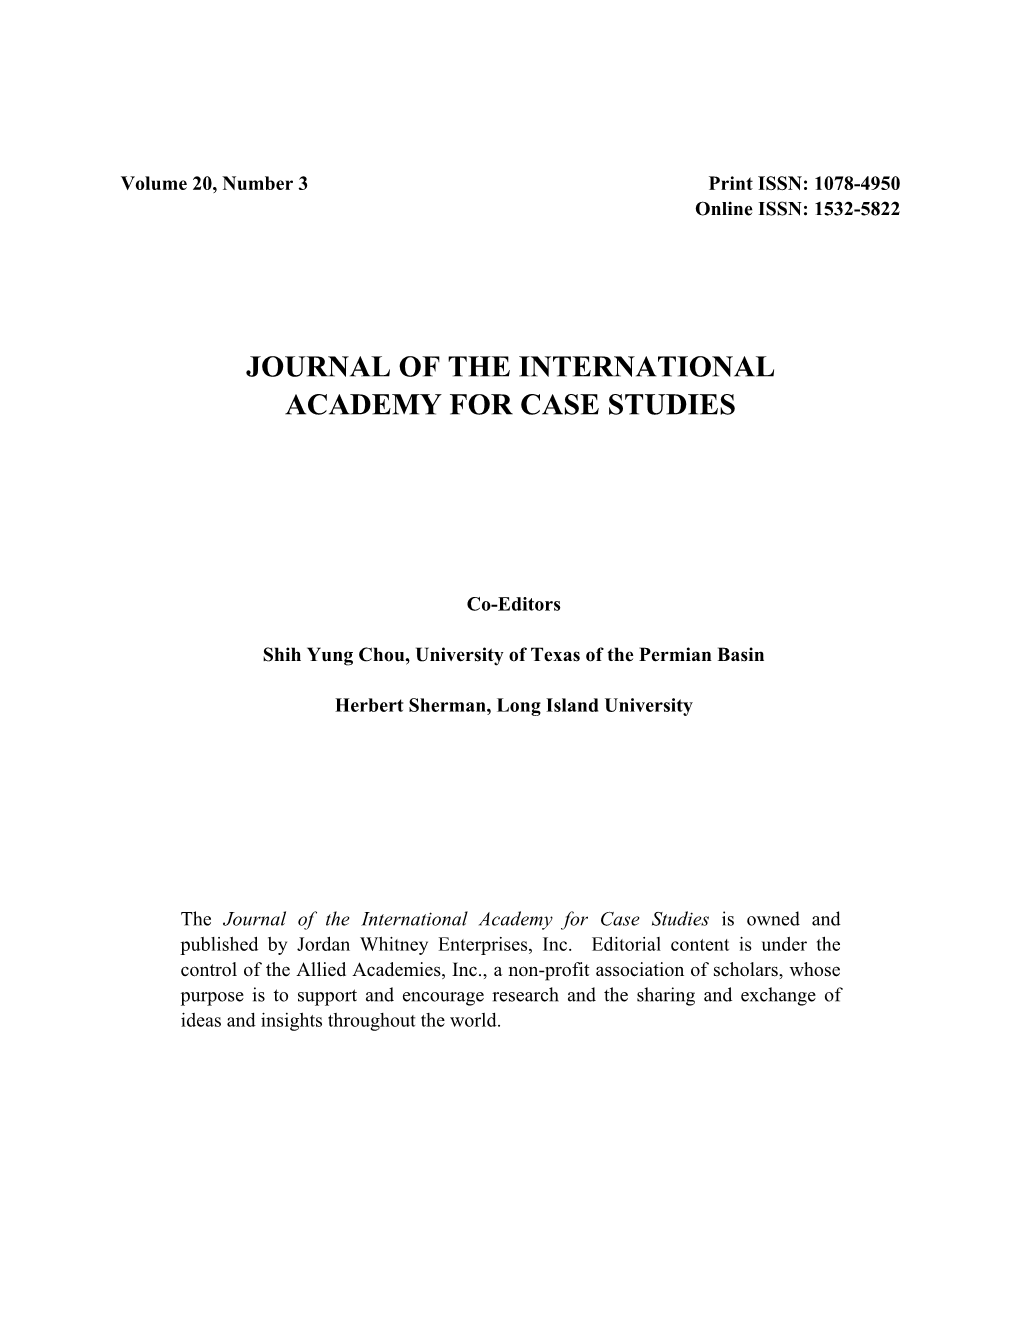 Journal of the International Academy for Case Studies